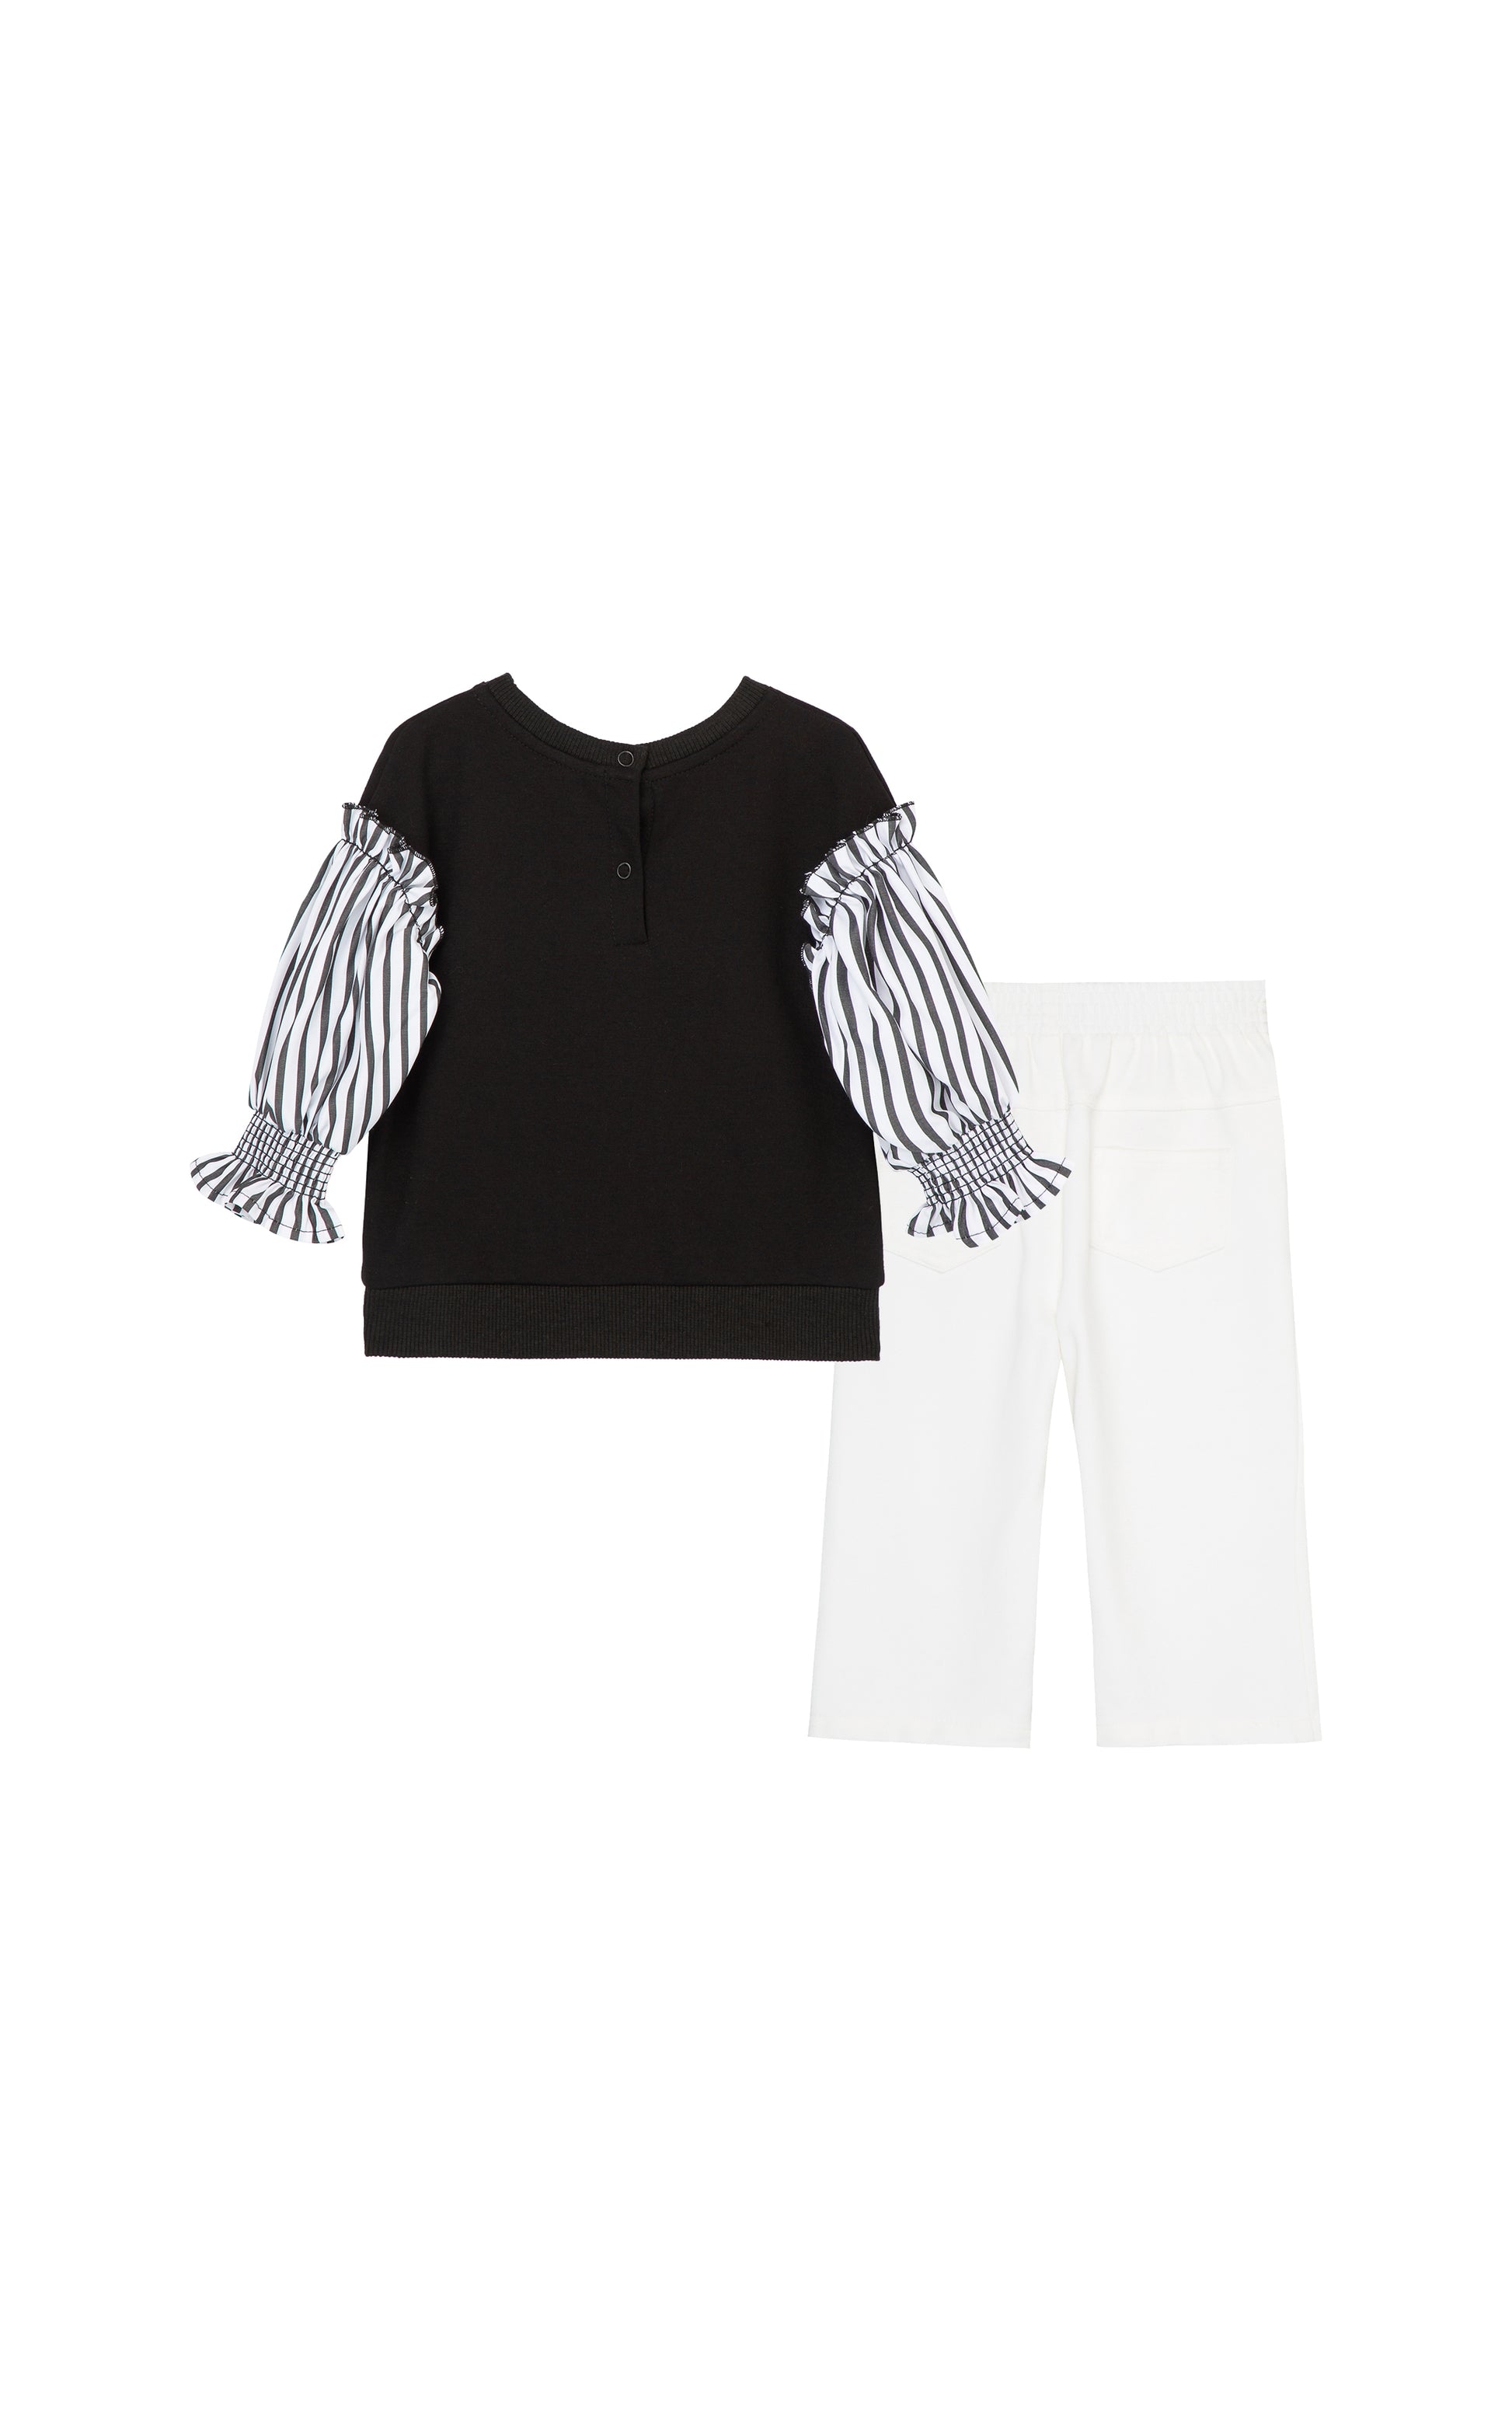 BACK OF BLACK KNIT TOP WITH WOVEN BLACK-AND-WHITE STRIPED SLEEVES, PAIRED WITH A KNIT PULL-ON PANT THAT LOOKS LIKE A JEAN